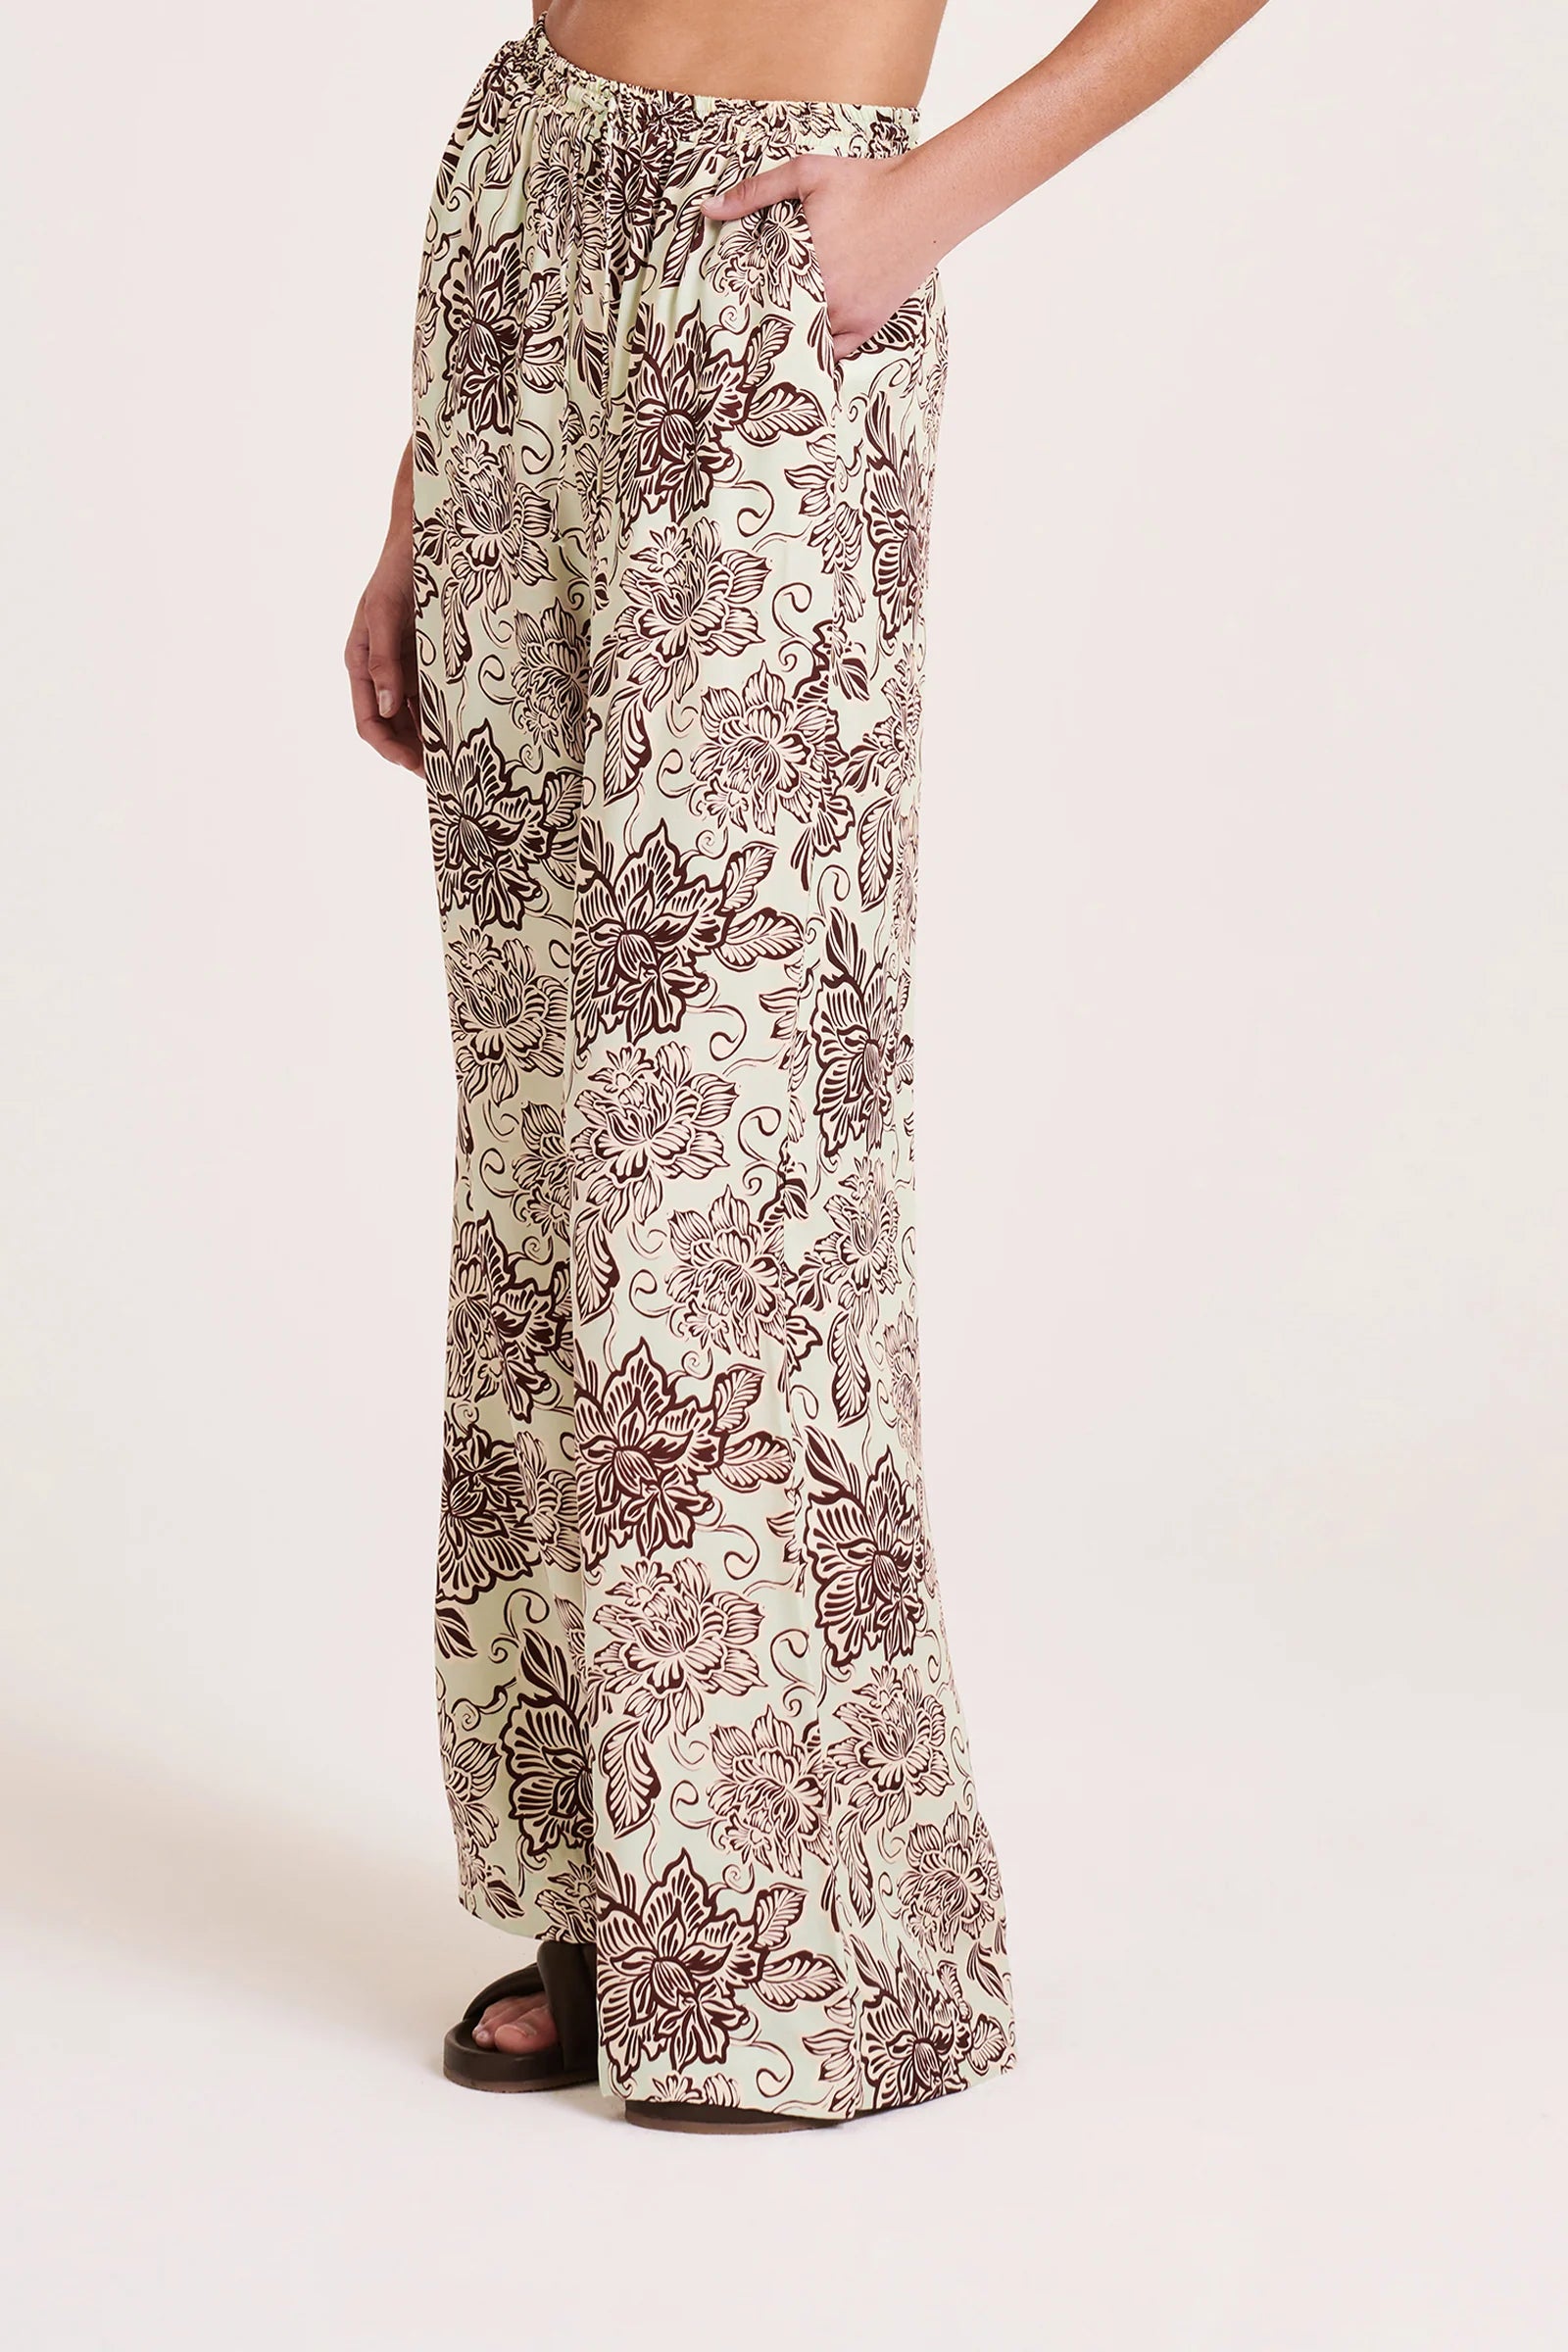 The Misi Cupro Pant is made from our signature cupro fabrication in our exclusive Castillo print. The silhouette is a relaxed wide leg, full length pant. Features include a an elasticated waistband with a drawstring, side seam pockets and two back patch pockets.